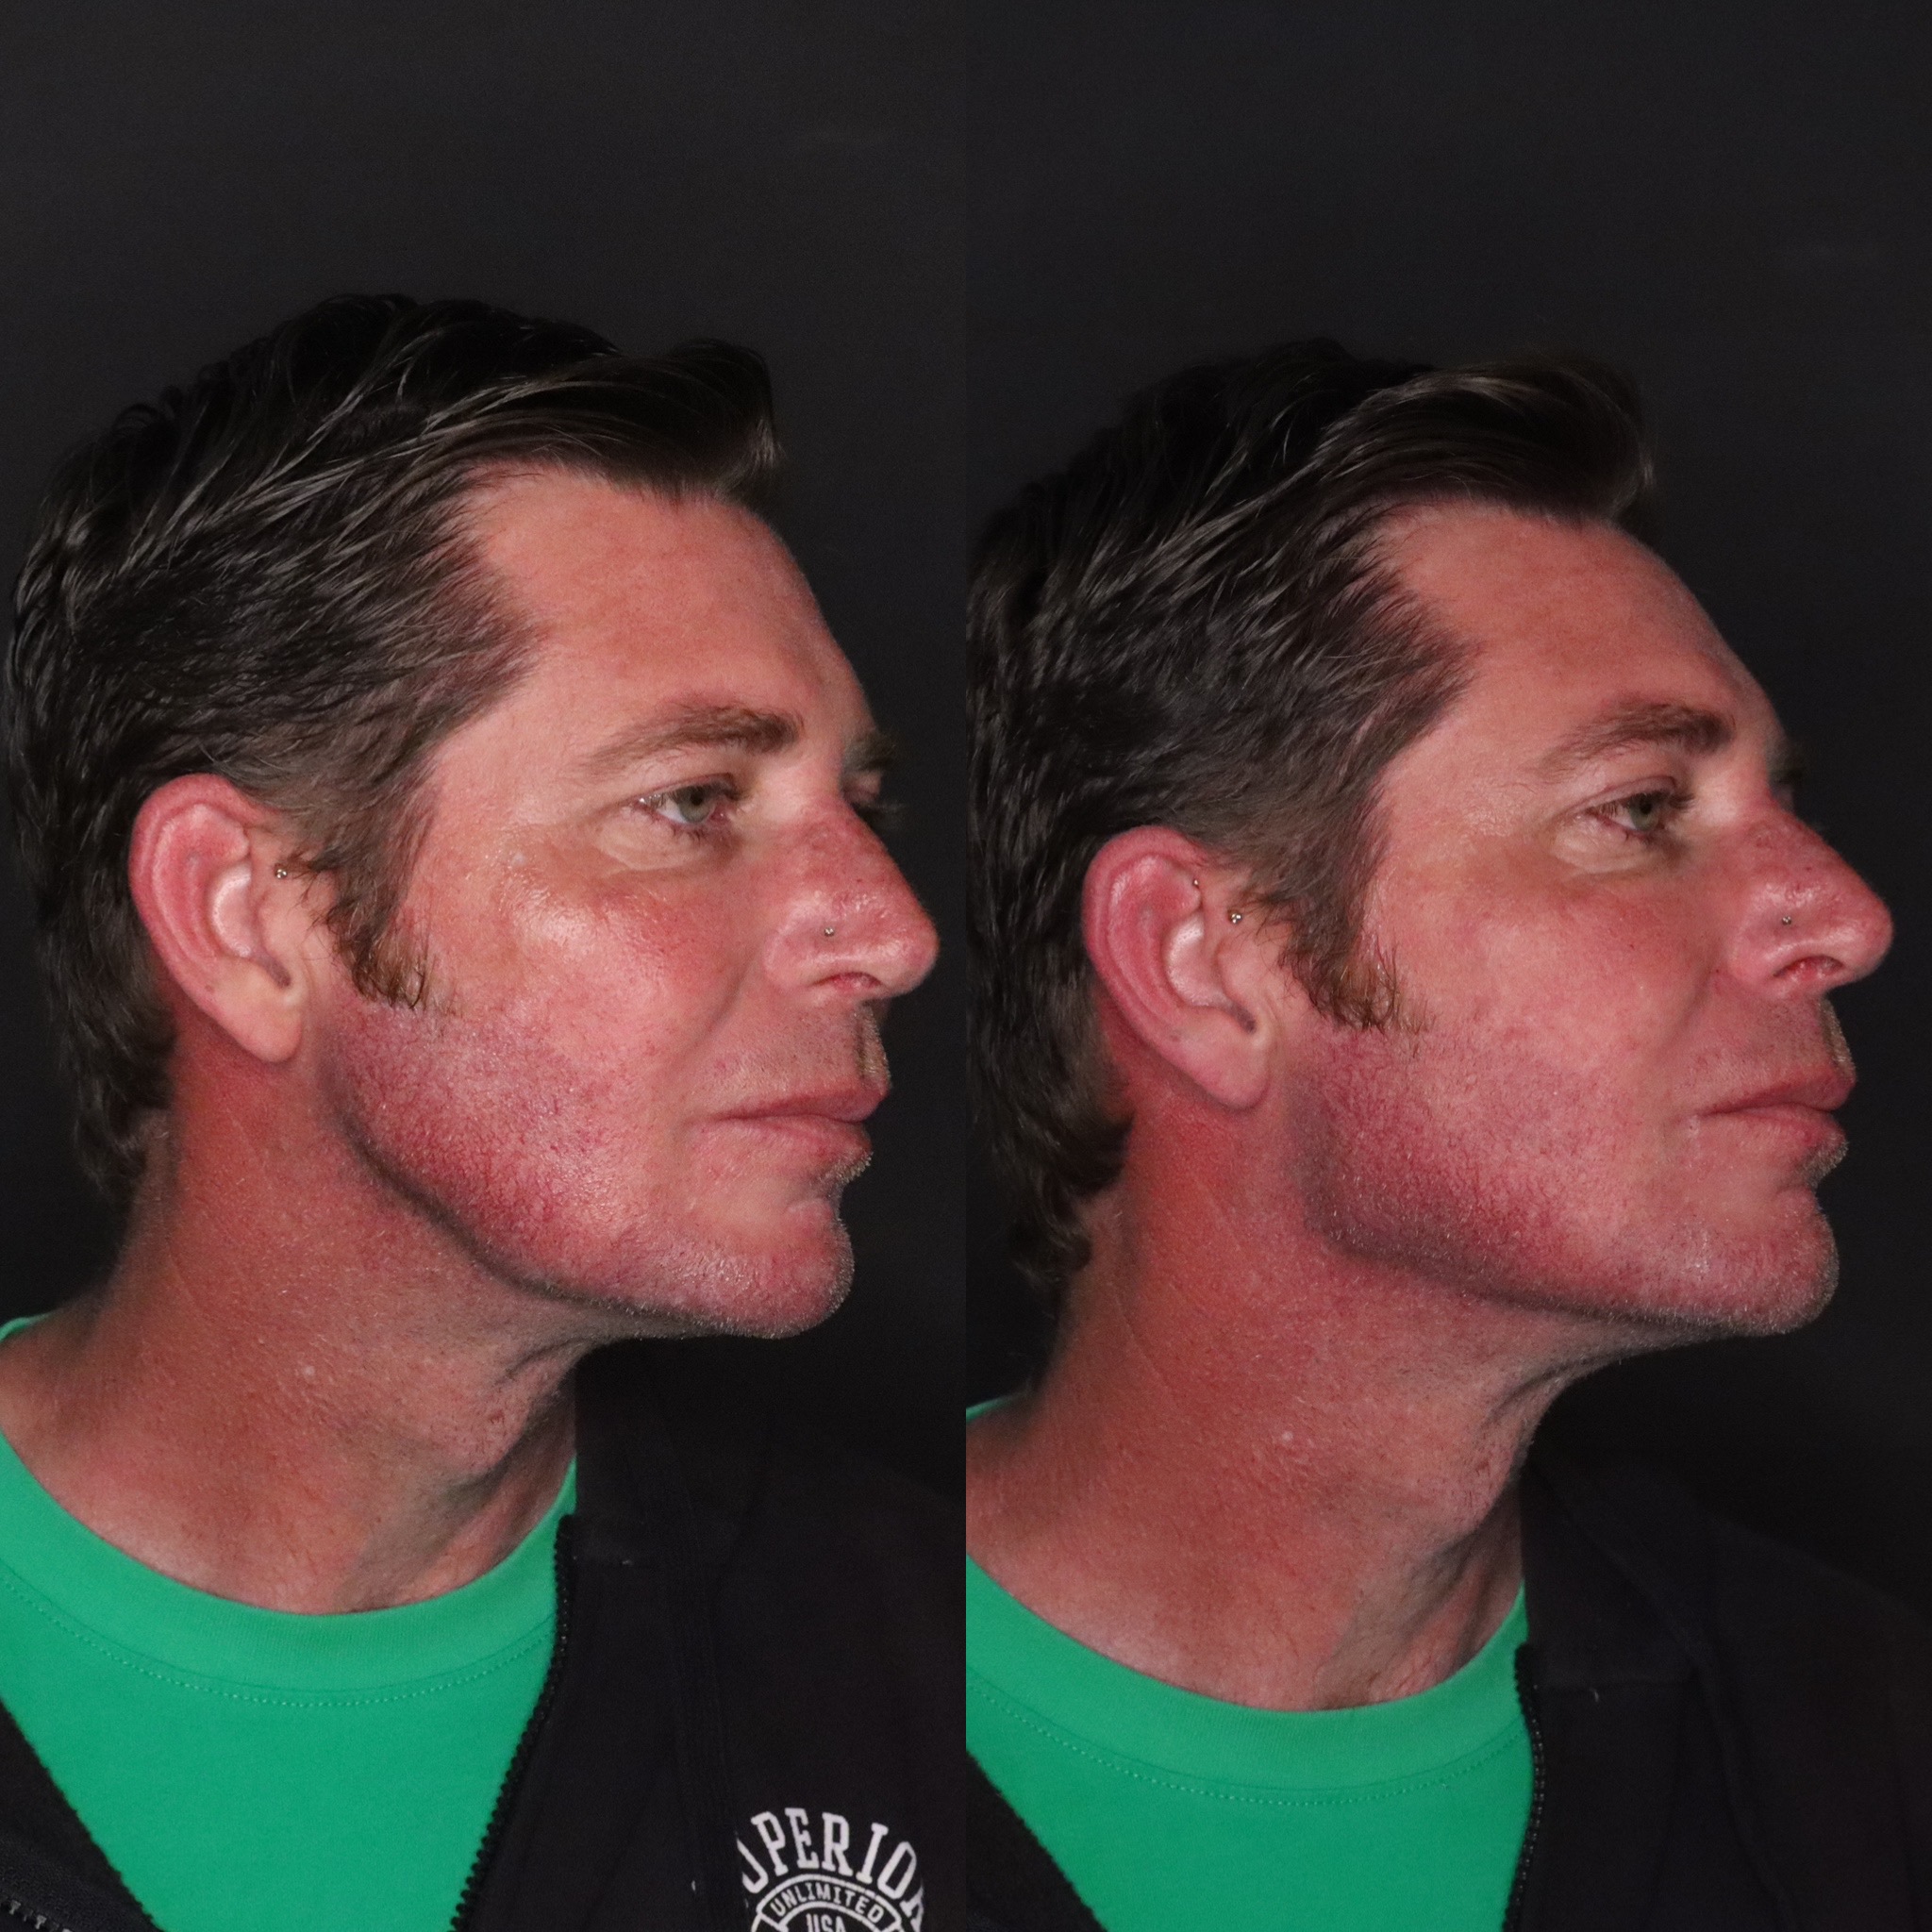 Photographs of a man's face before and after cosmetic treatment